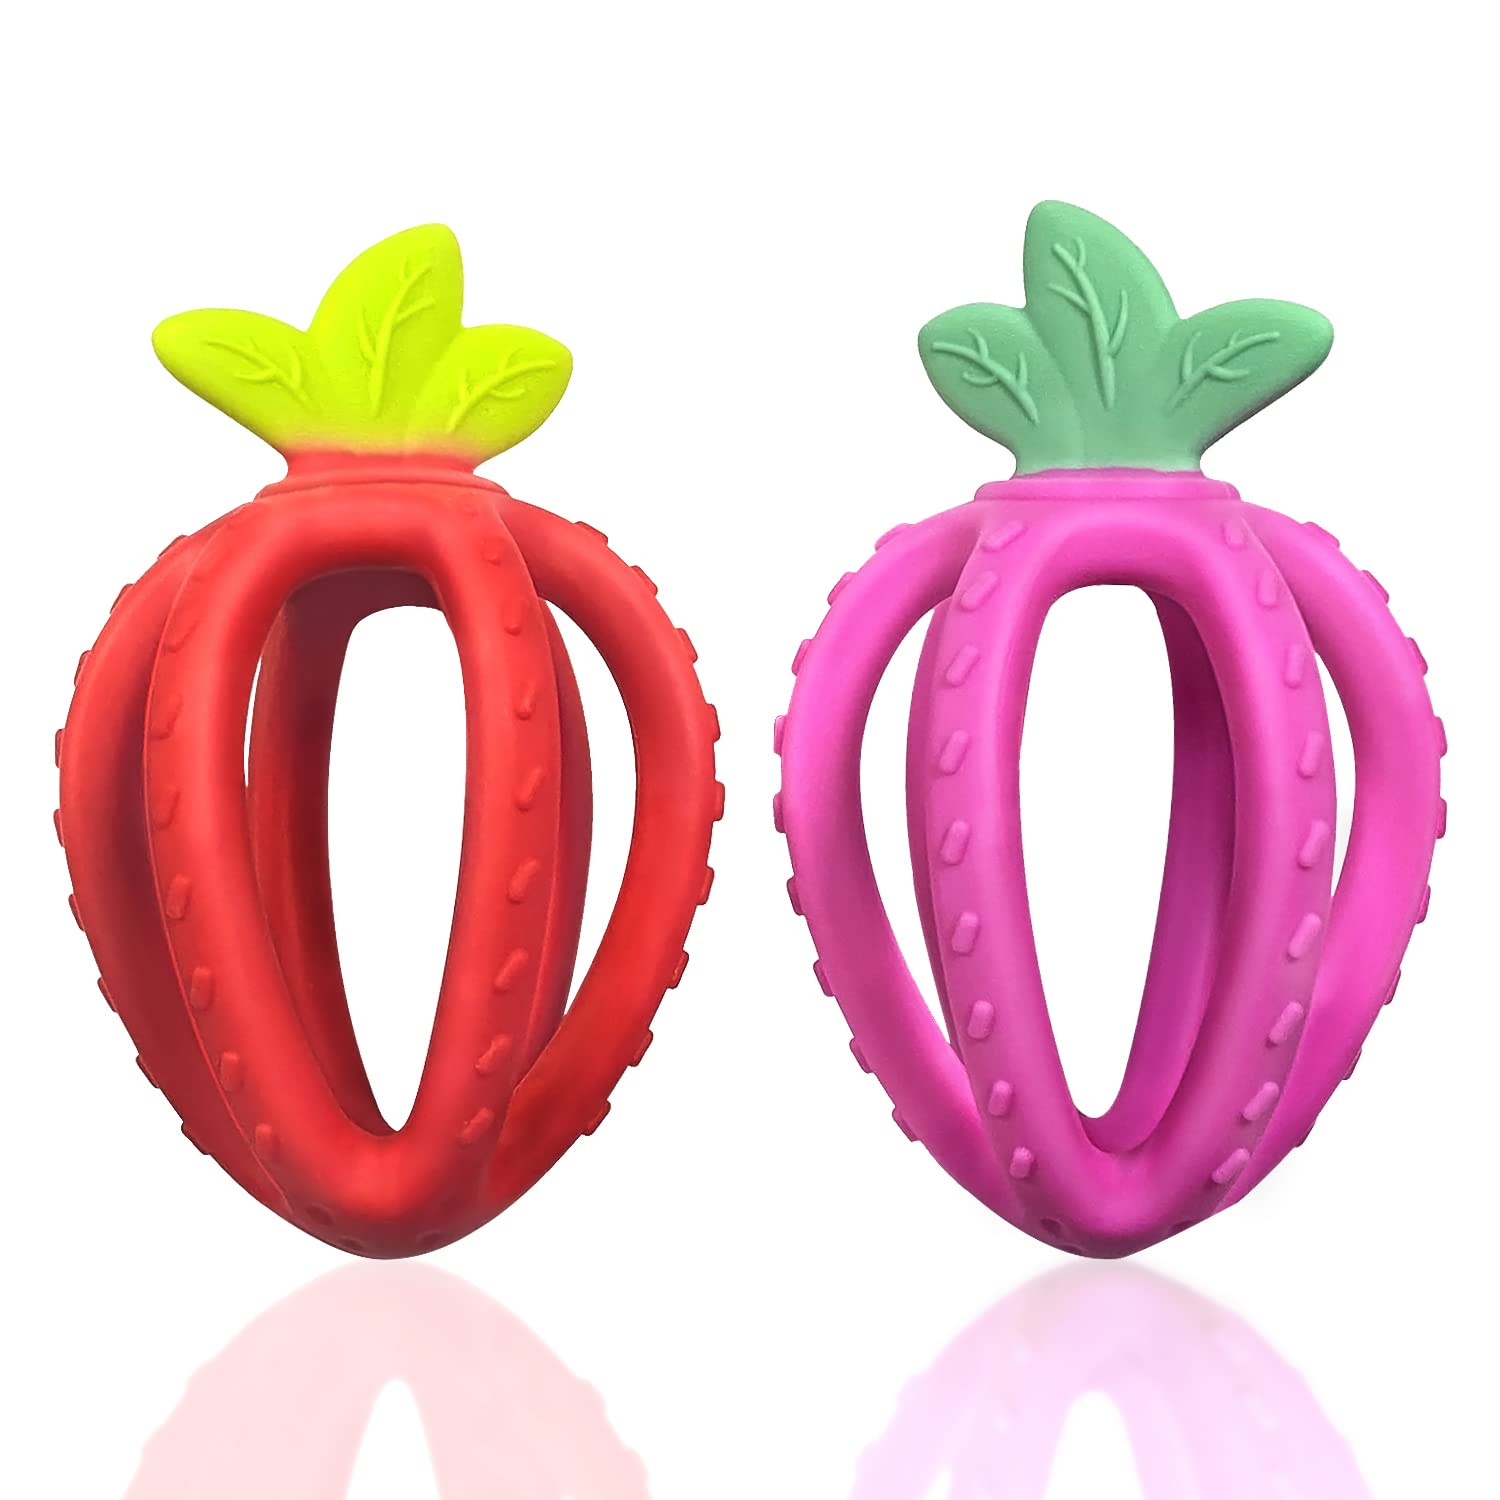 Baby Teething Toys, Seeway Strawberry Shaped Teether Chew Toys for Newborn Infant, Food-Grade Silicone Silicone Teething Ball for Kids with Autism,Oral Motor Teething Biting Needs